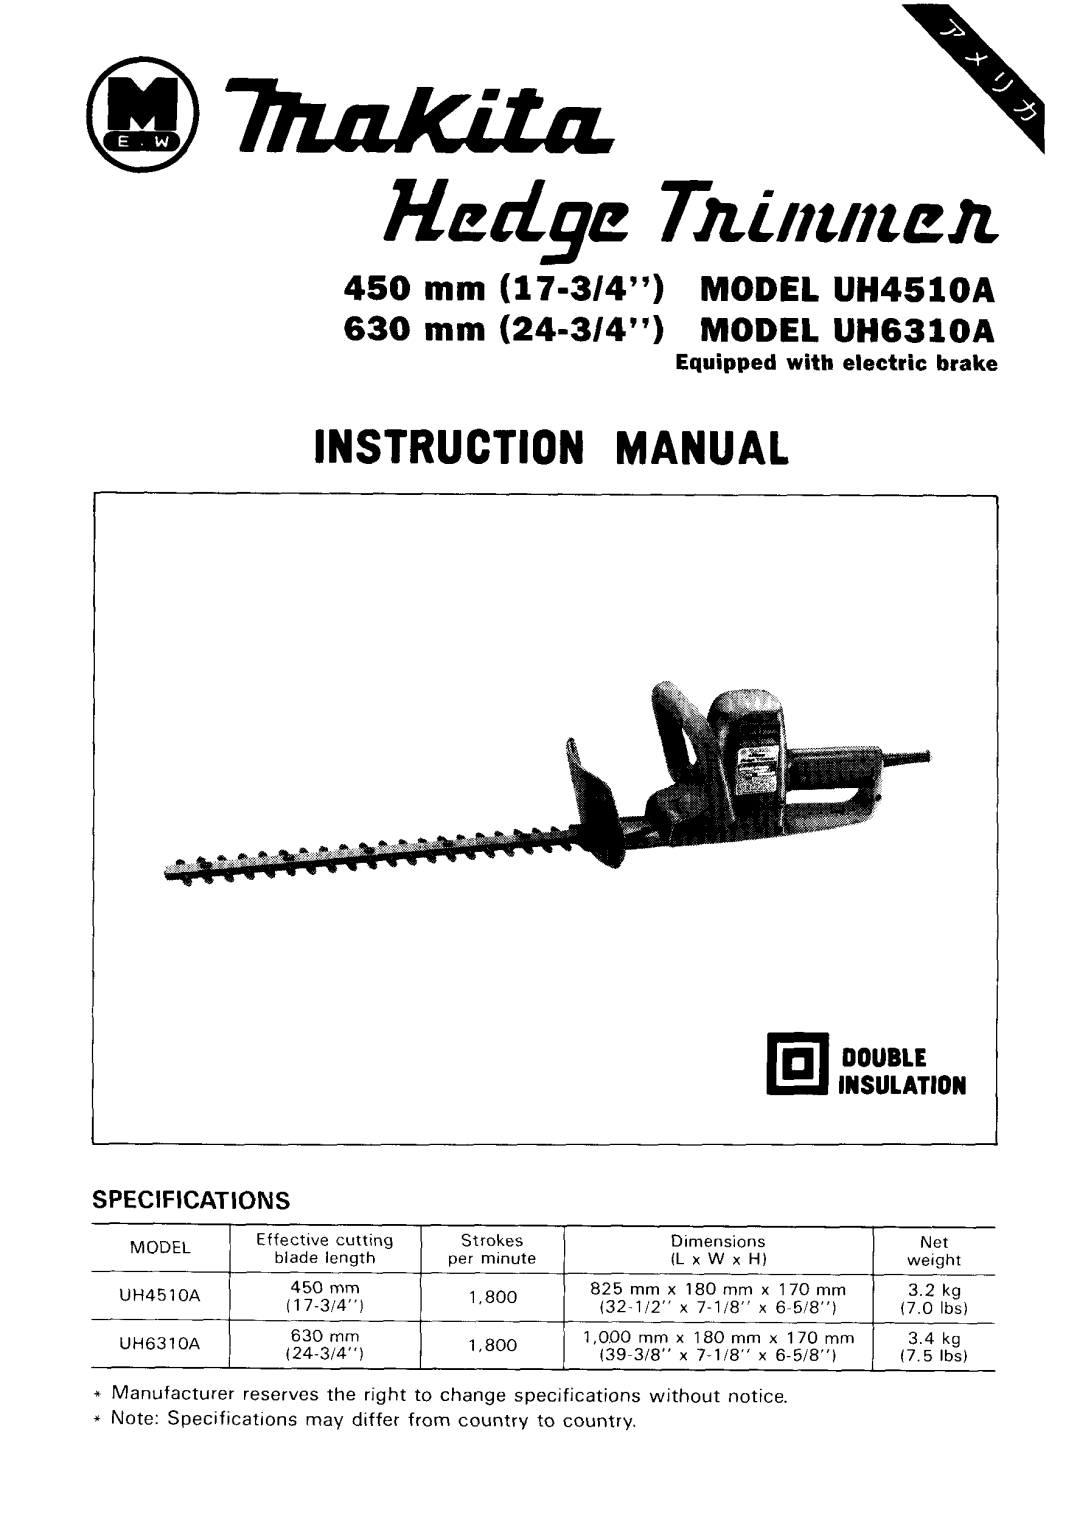 Makita dimensions 450 mm 17-314 MODEL UH4510A, 630 mm 24-3/4 MODEL UH6310A, Specifications, 1.800, 3.2 kg, 7-118, 1,800 